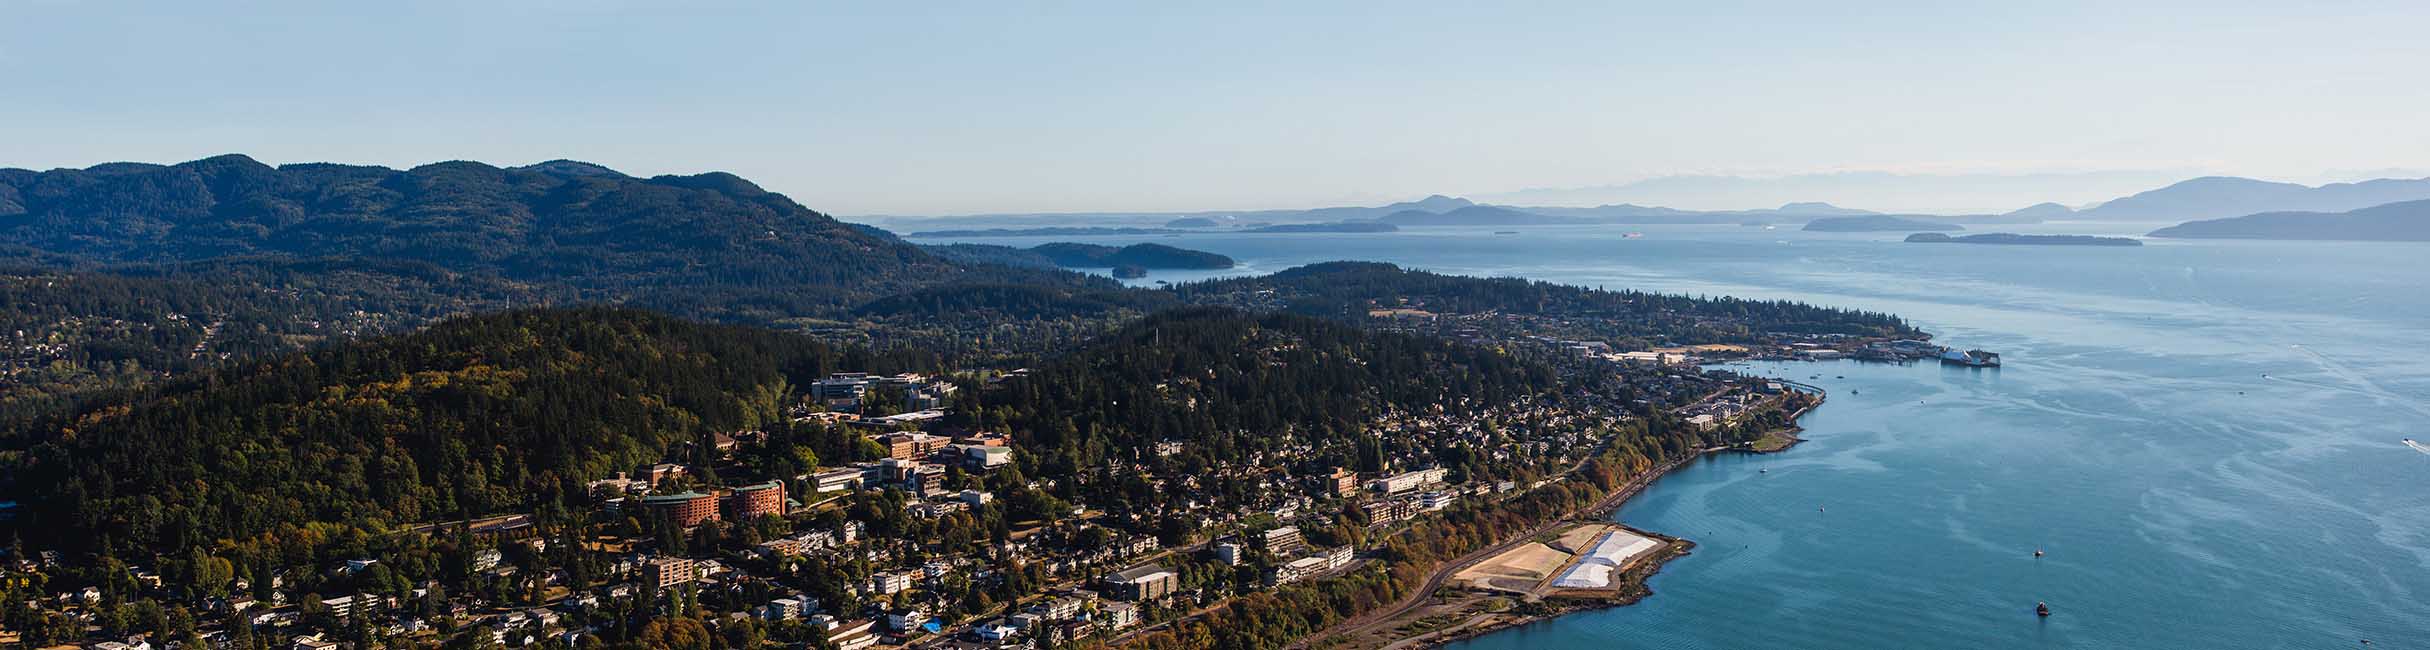 The Western campus viewed from the air looking out towards the islands and Bellingham bay